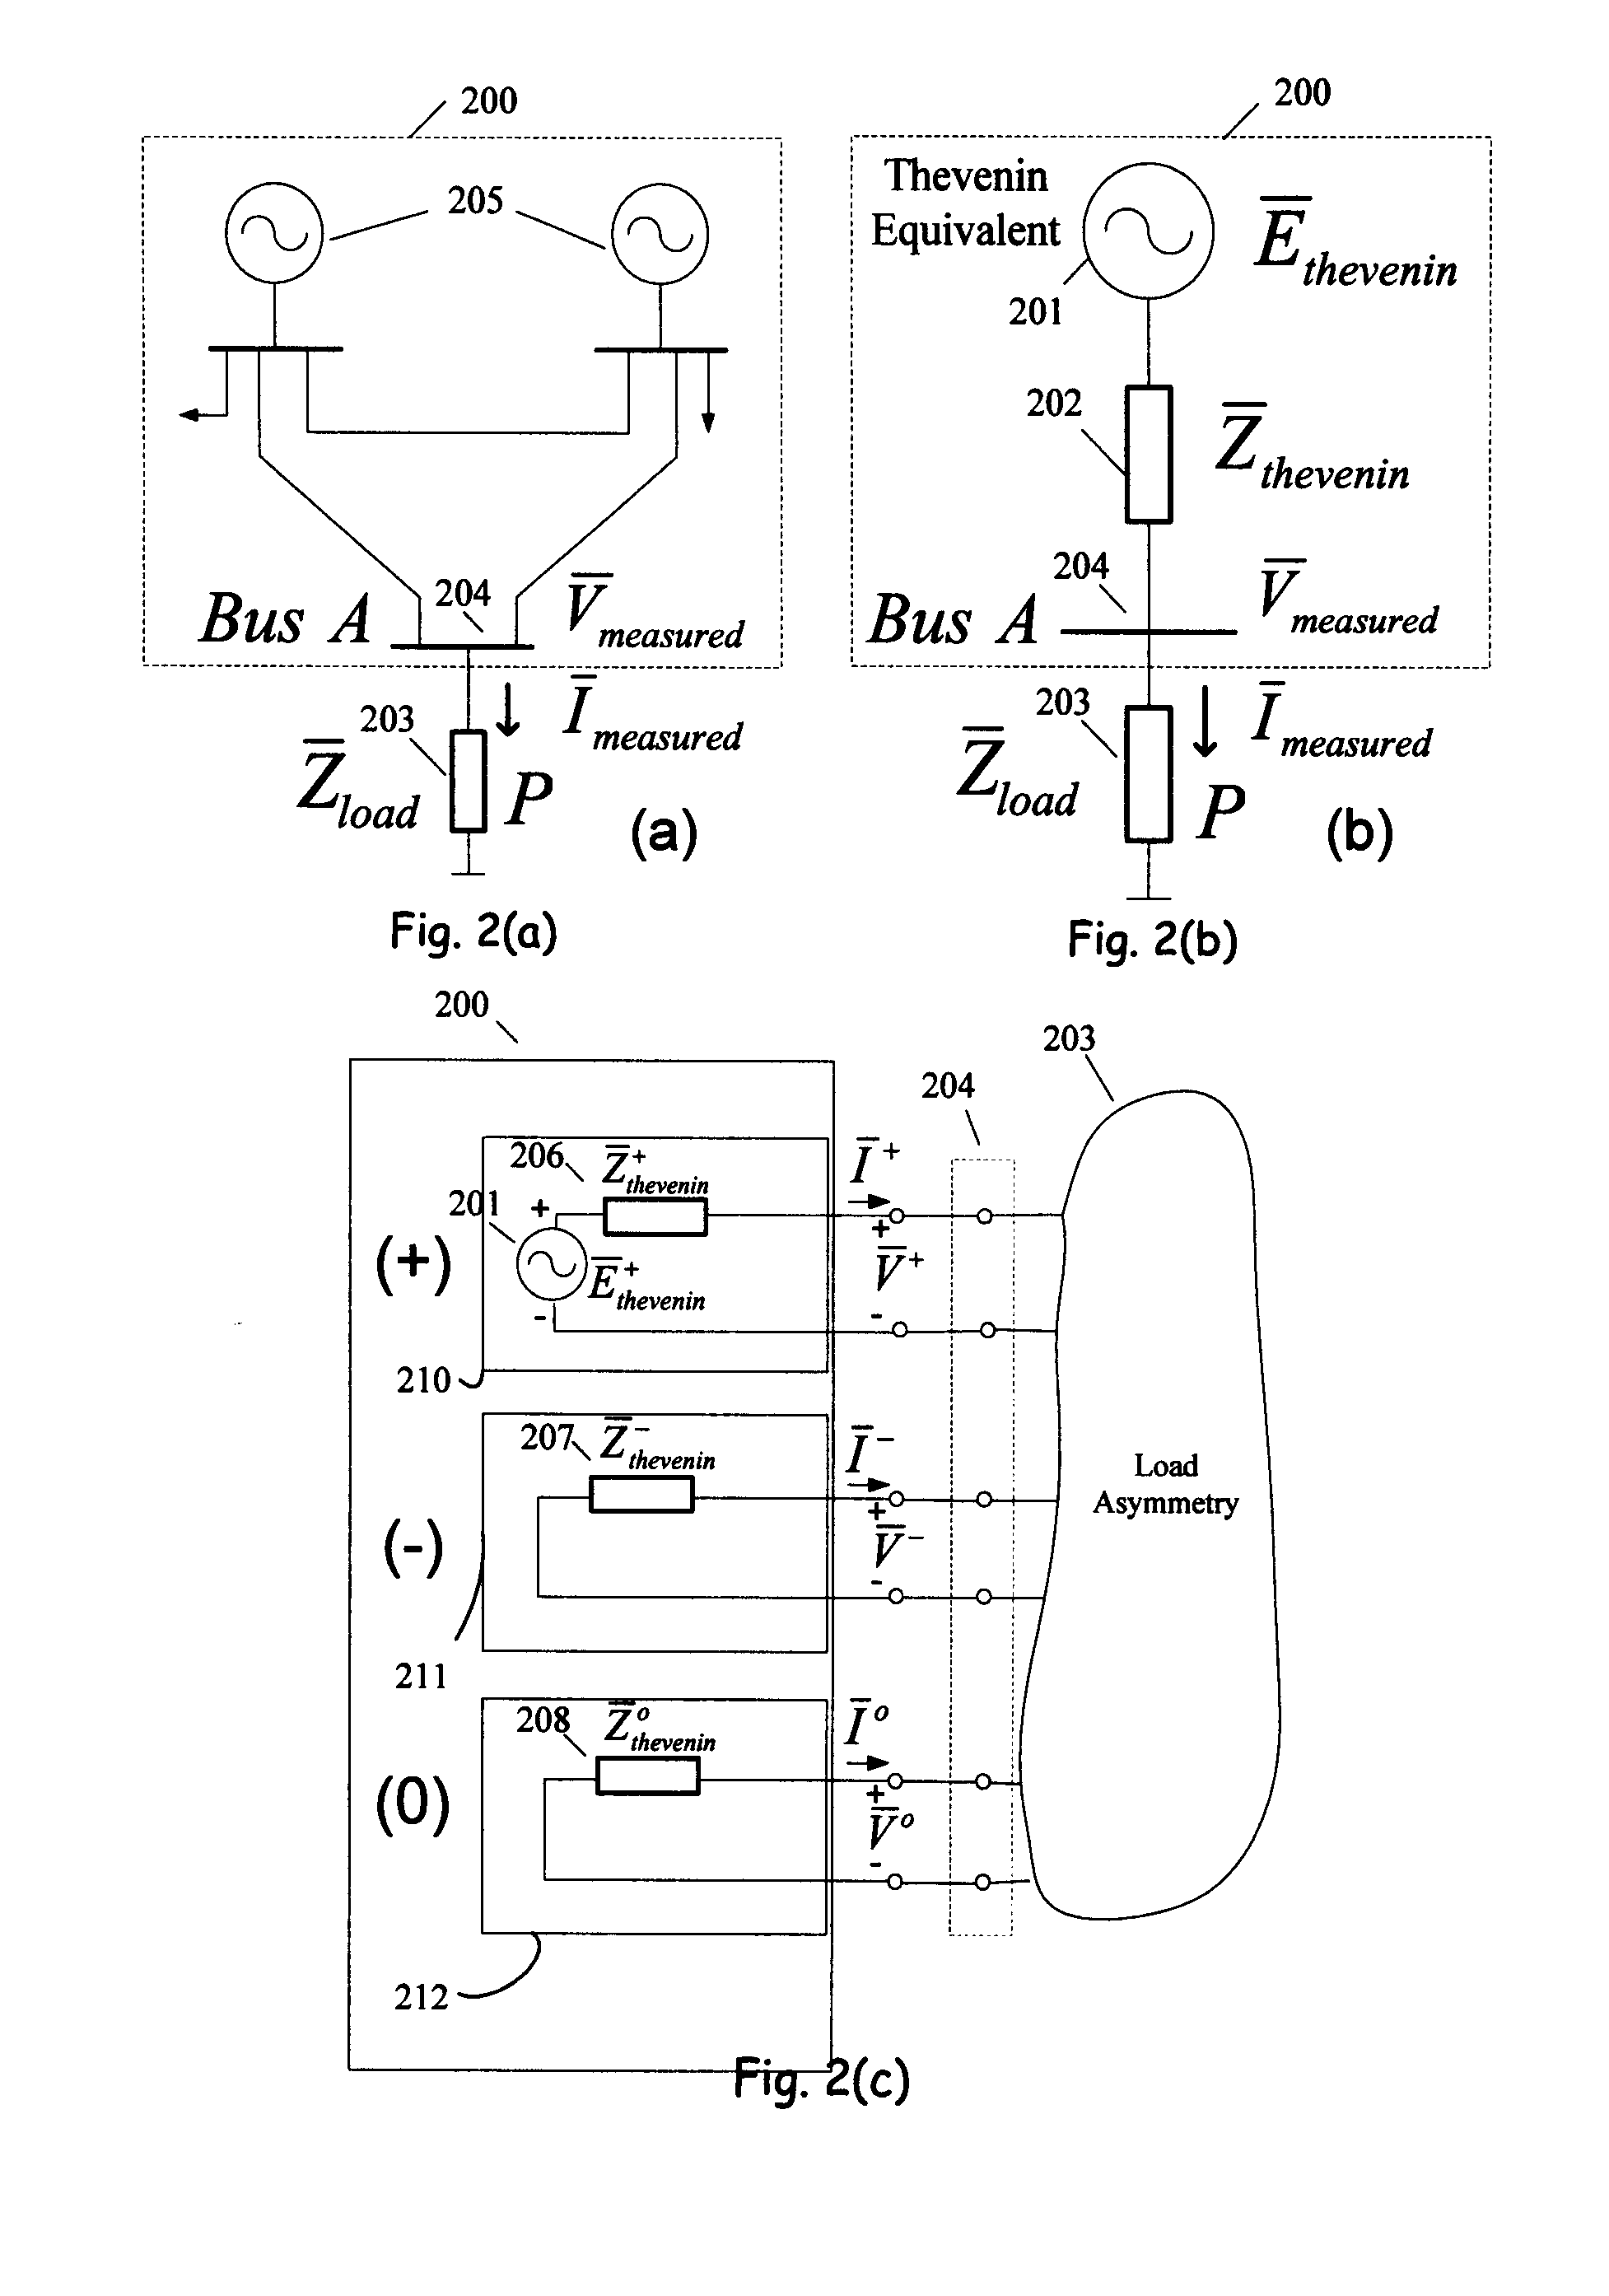 Method and system for protecting an electrical power transmission network